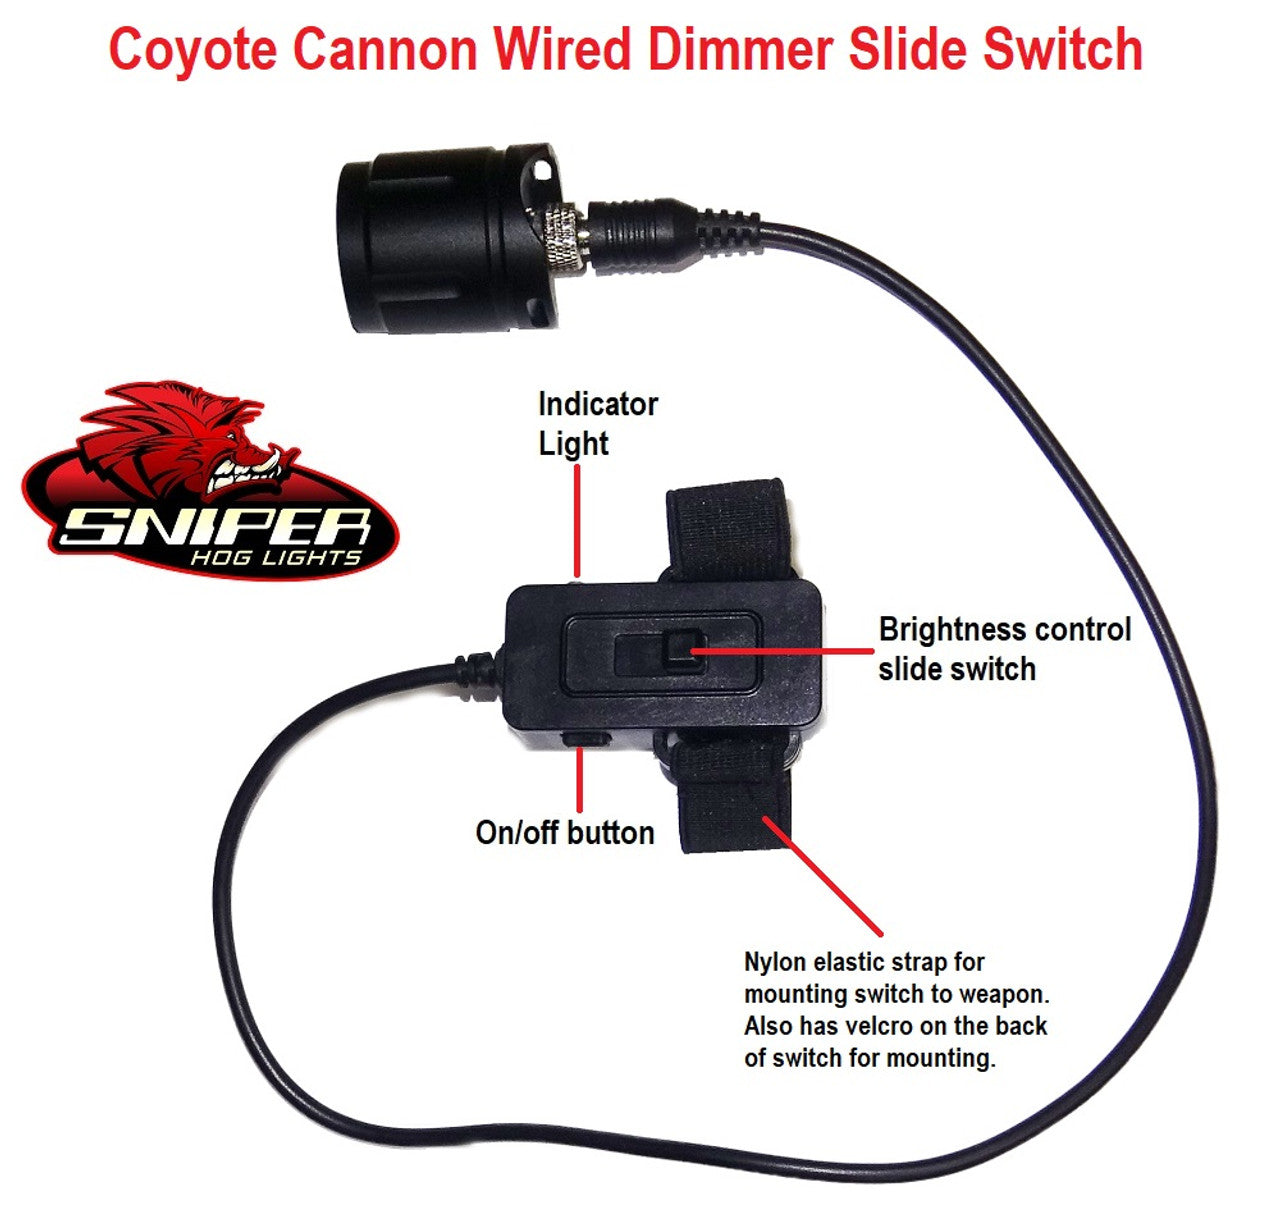 Sniper Hog Lights Coyote Cannon wired dimmer slide switch